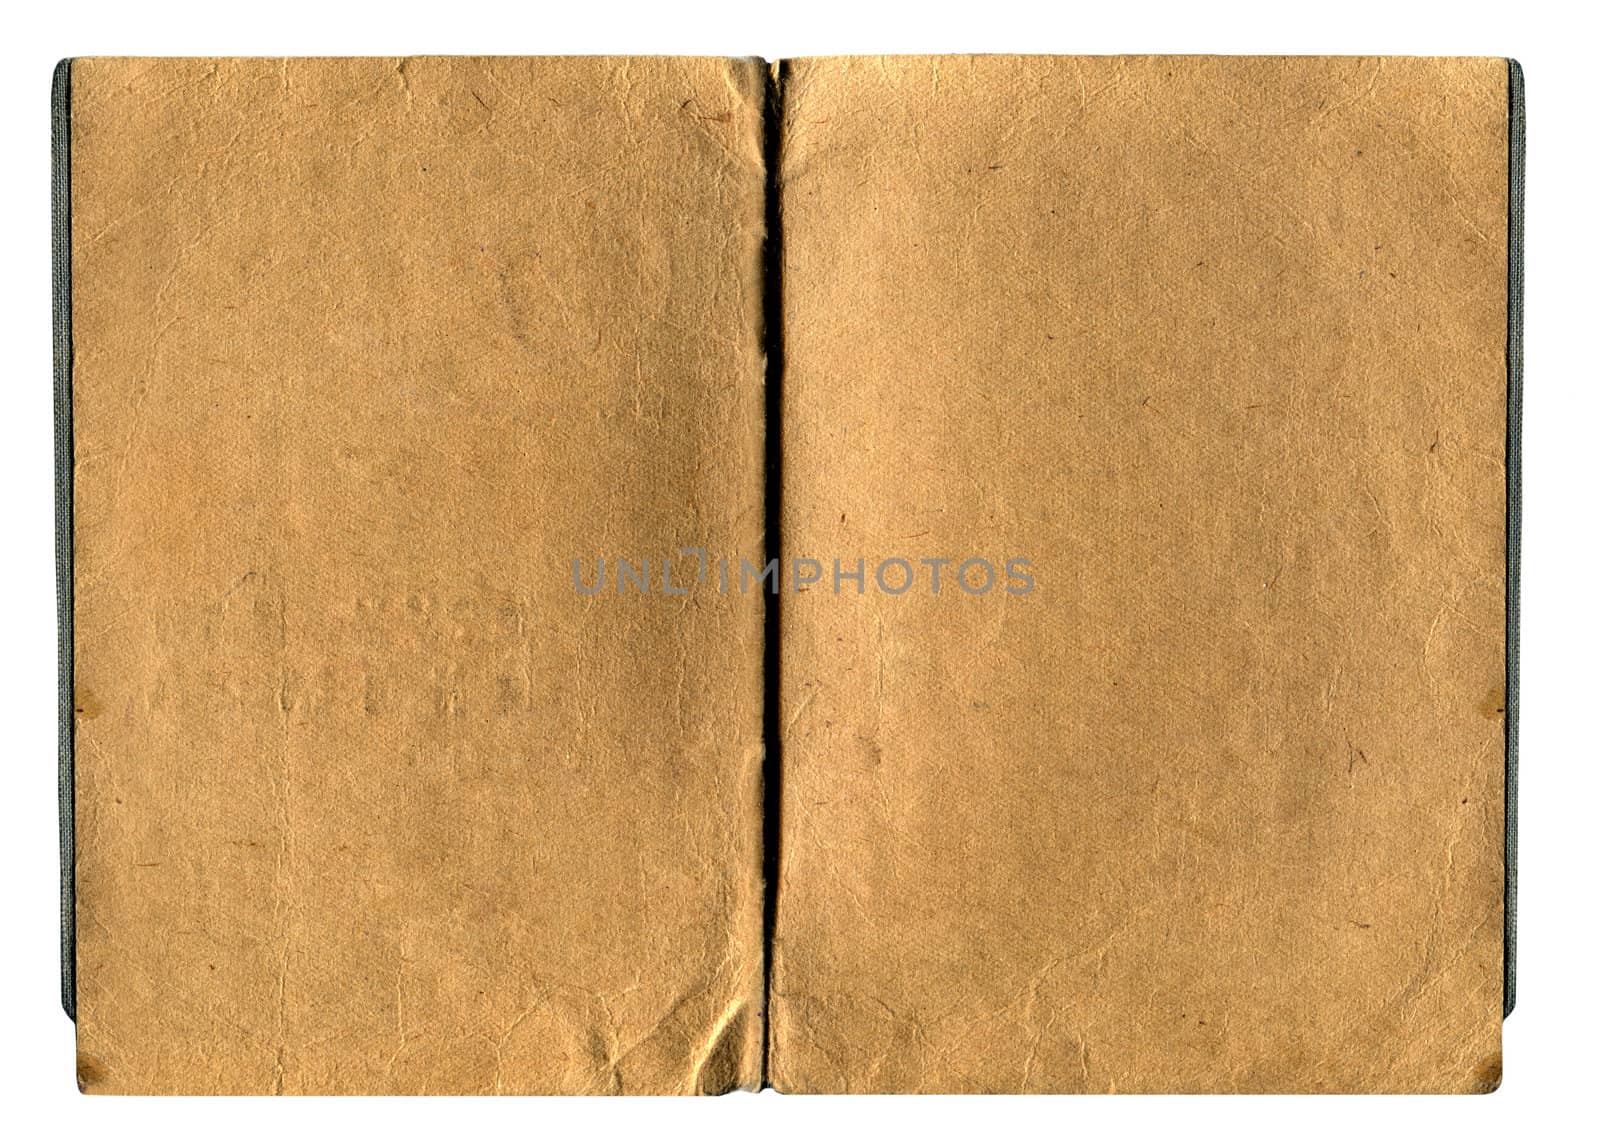 Pages of an Old Book Isolated On The White Background